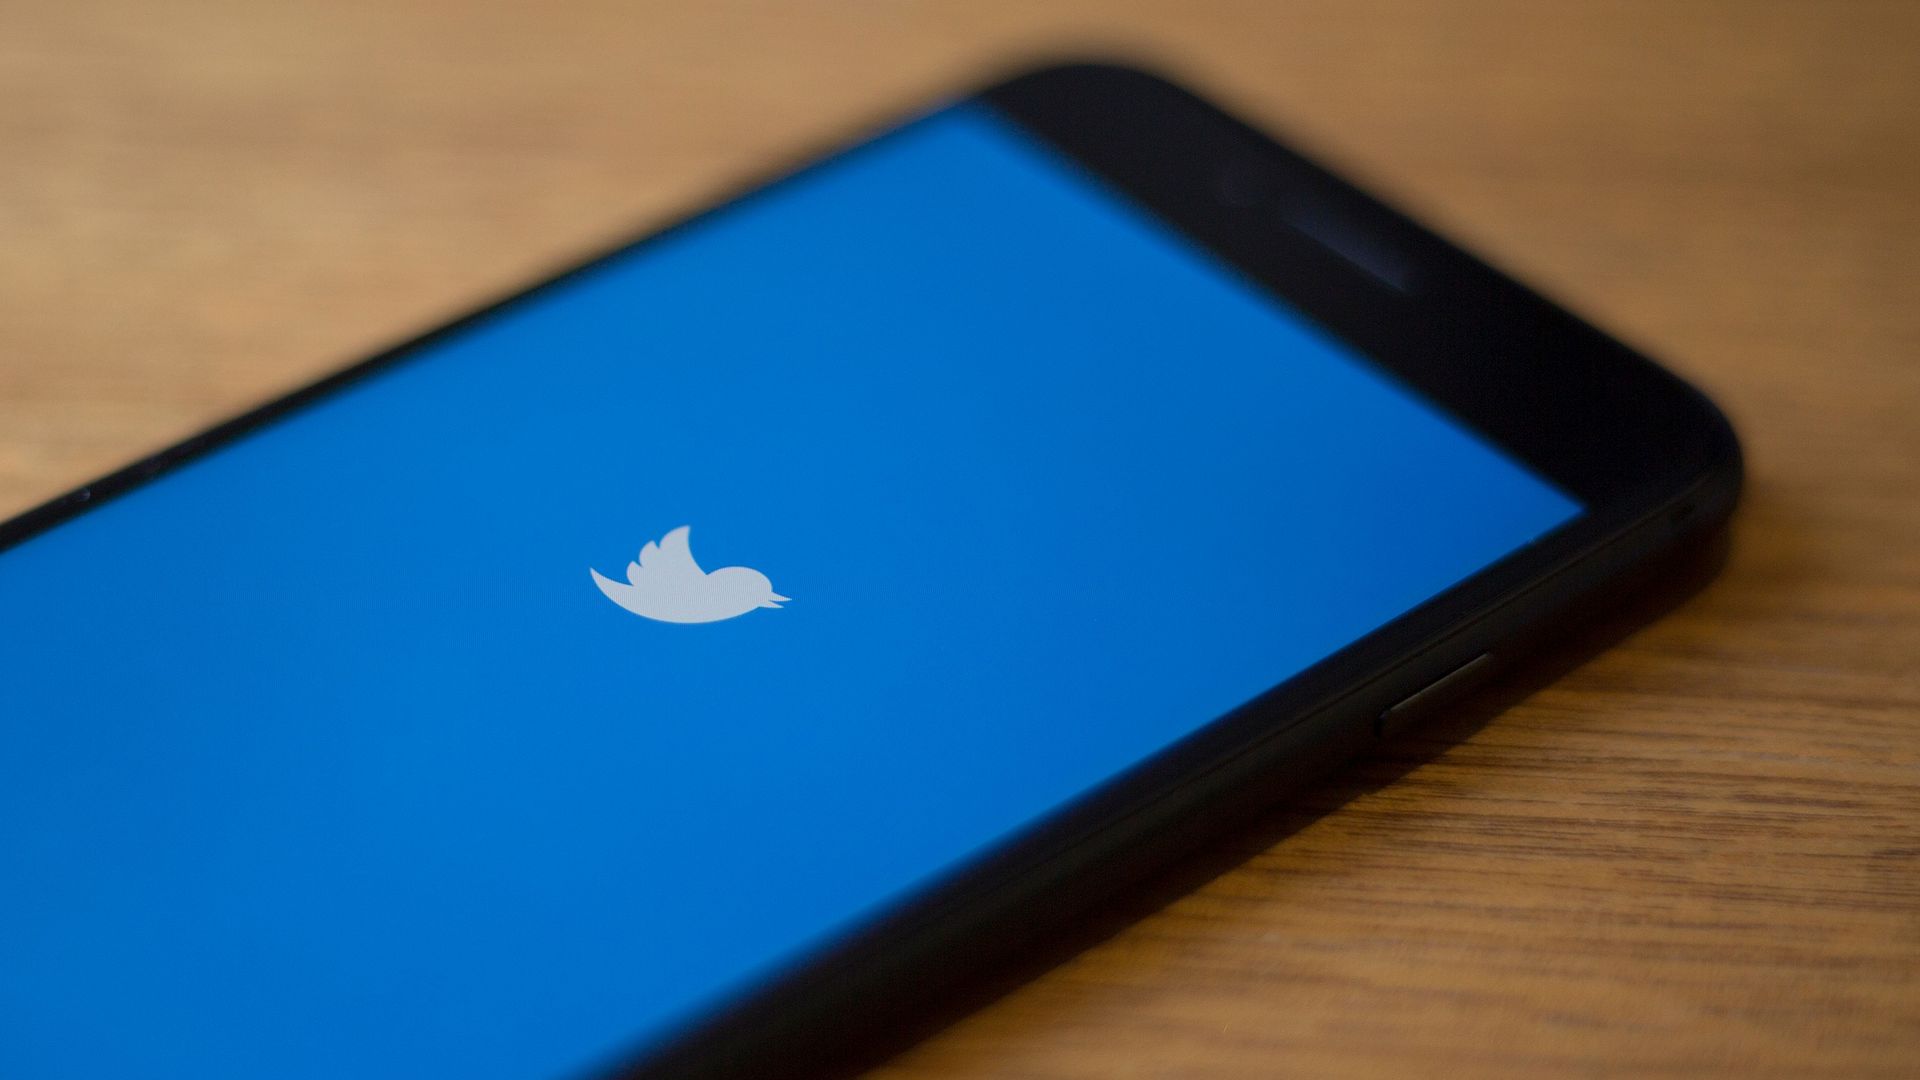 The Twitter logo on a phone.